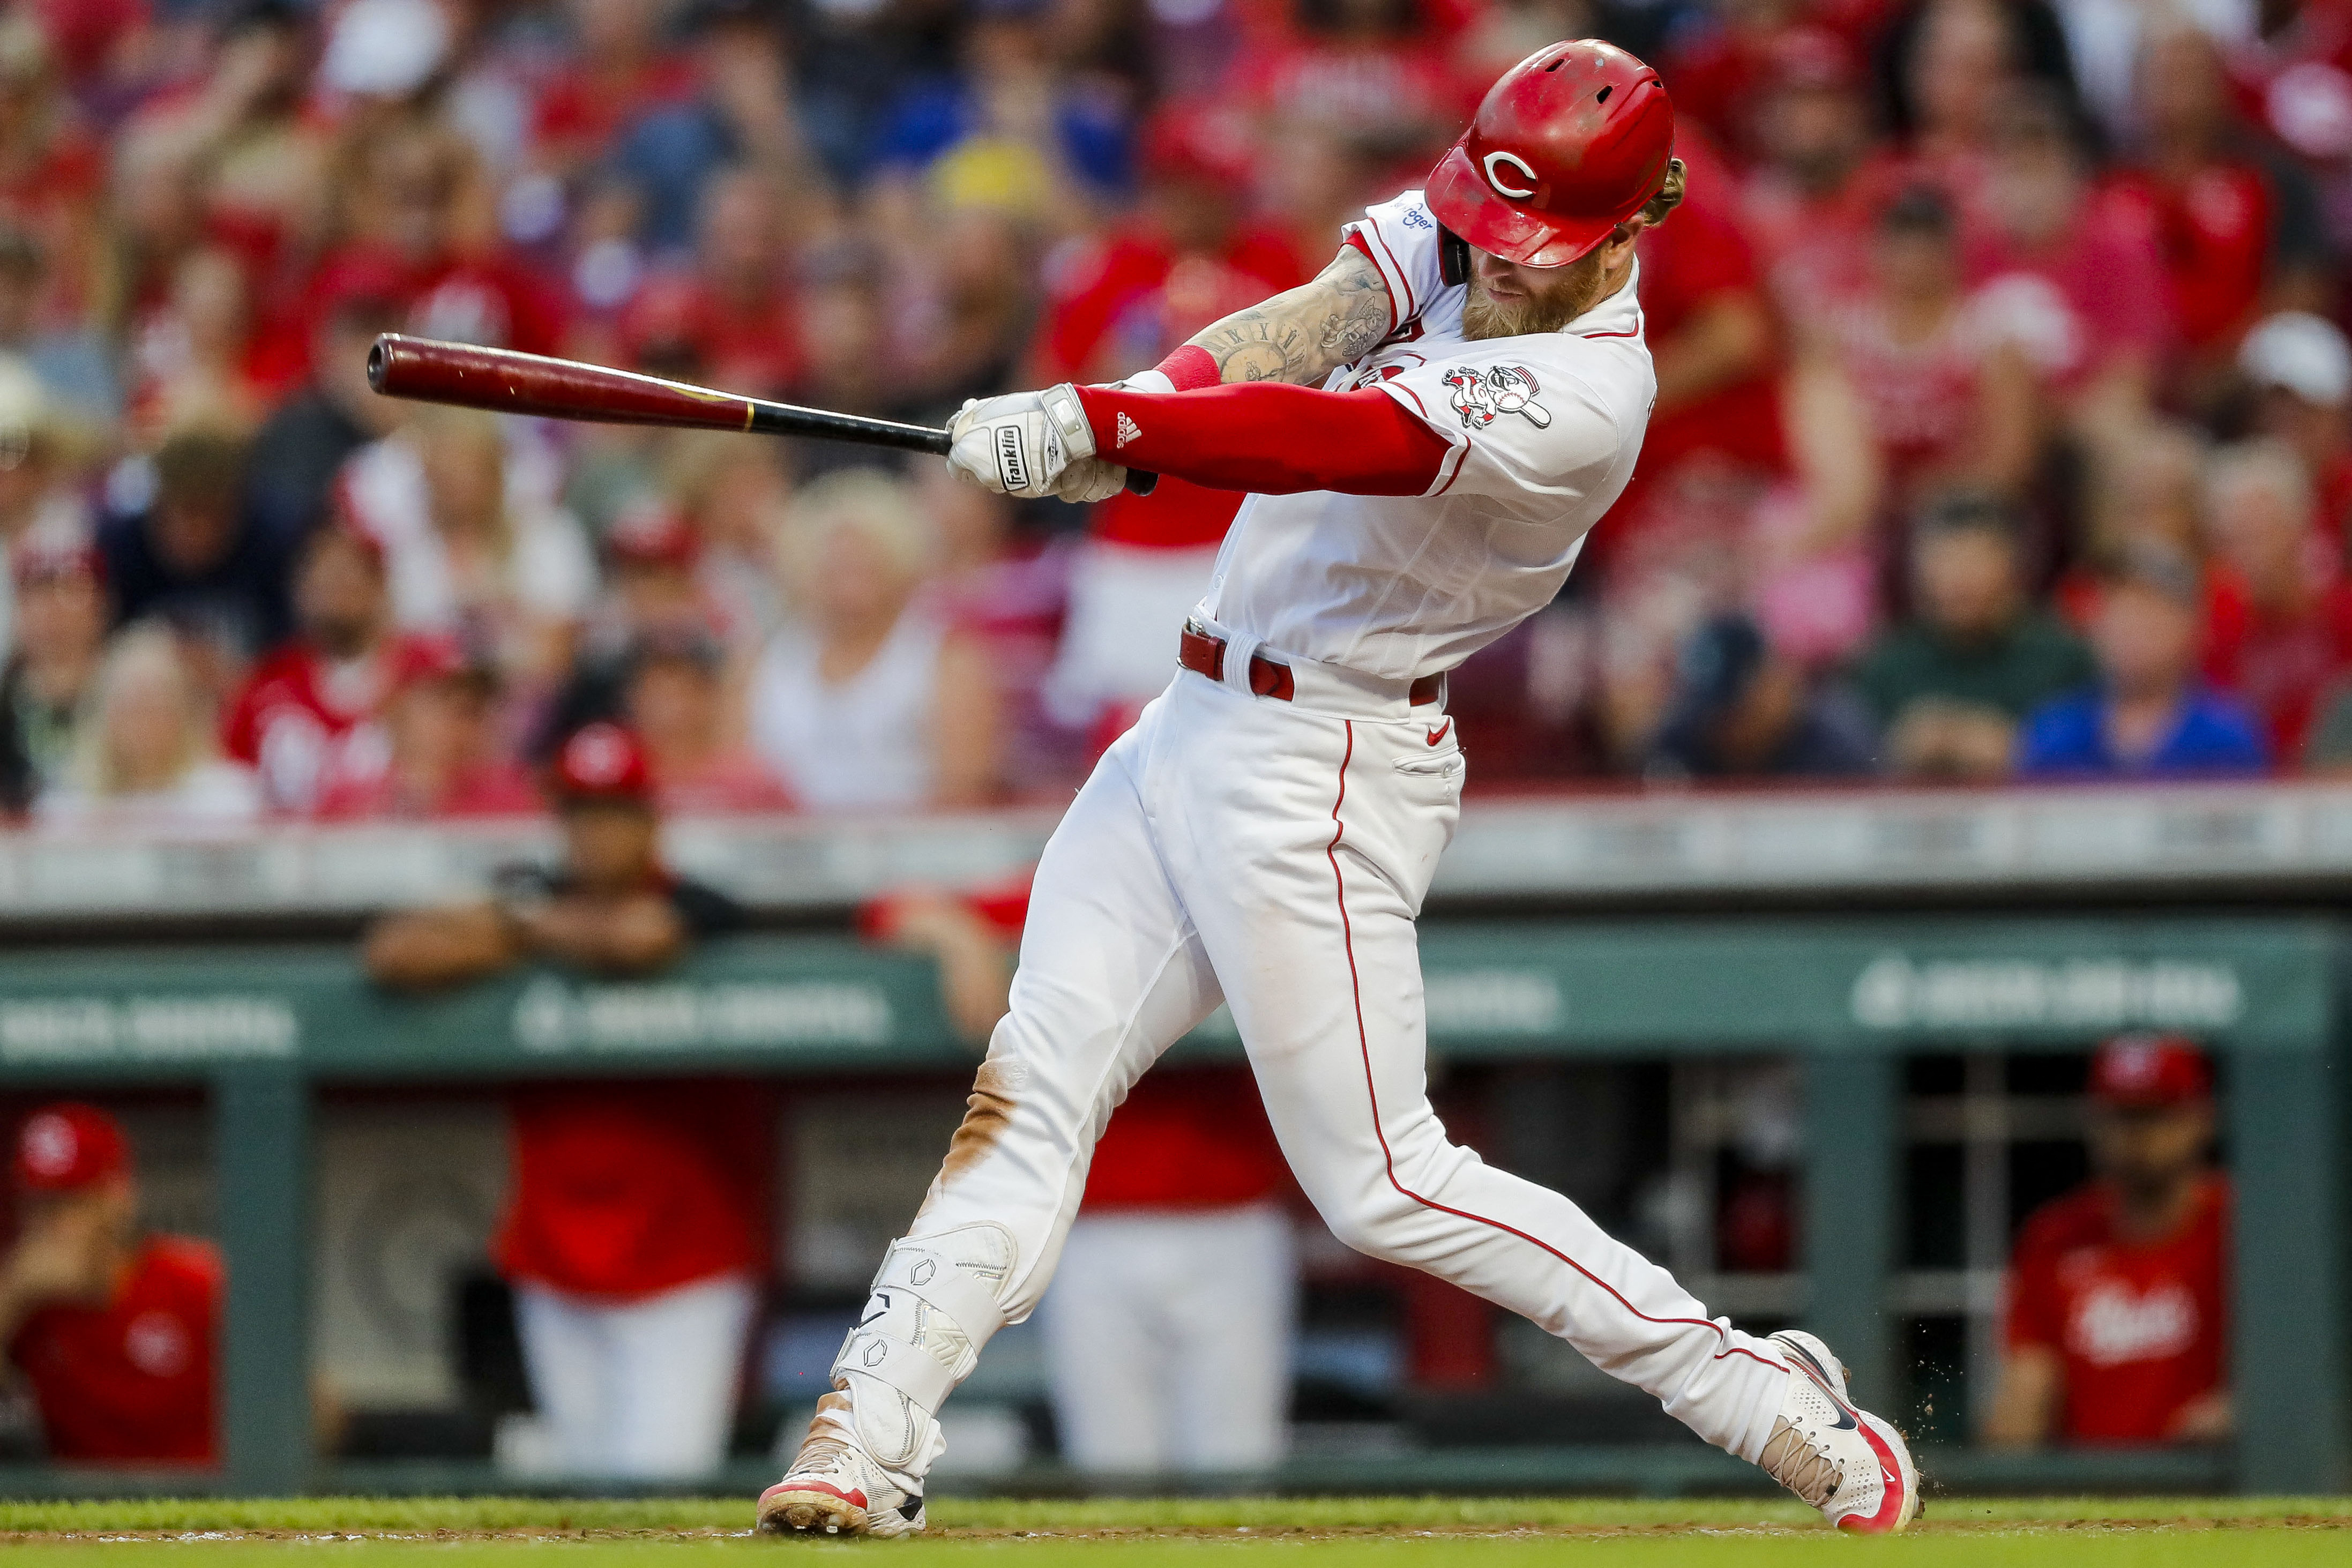 Nick Martini fuels Reds' late rally past Mariners